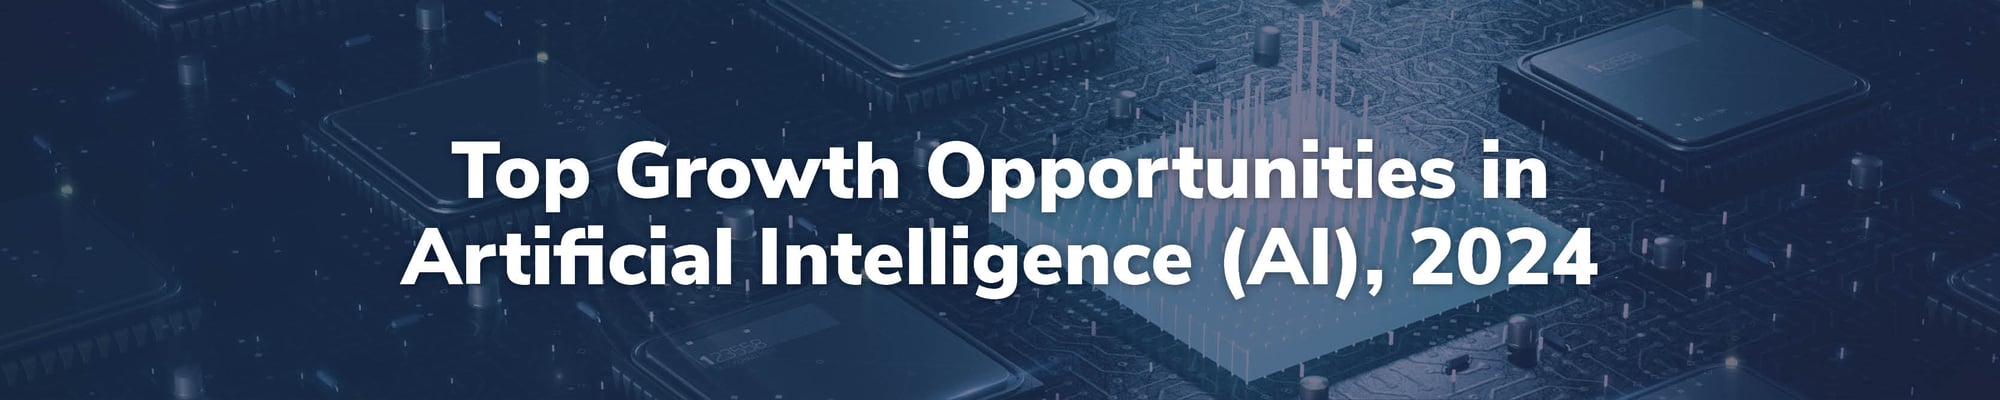 Top Growth Opportunities in Artificial Intelligence (AI), 2024